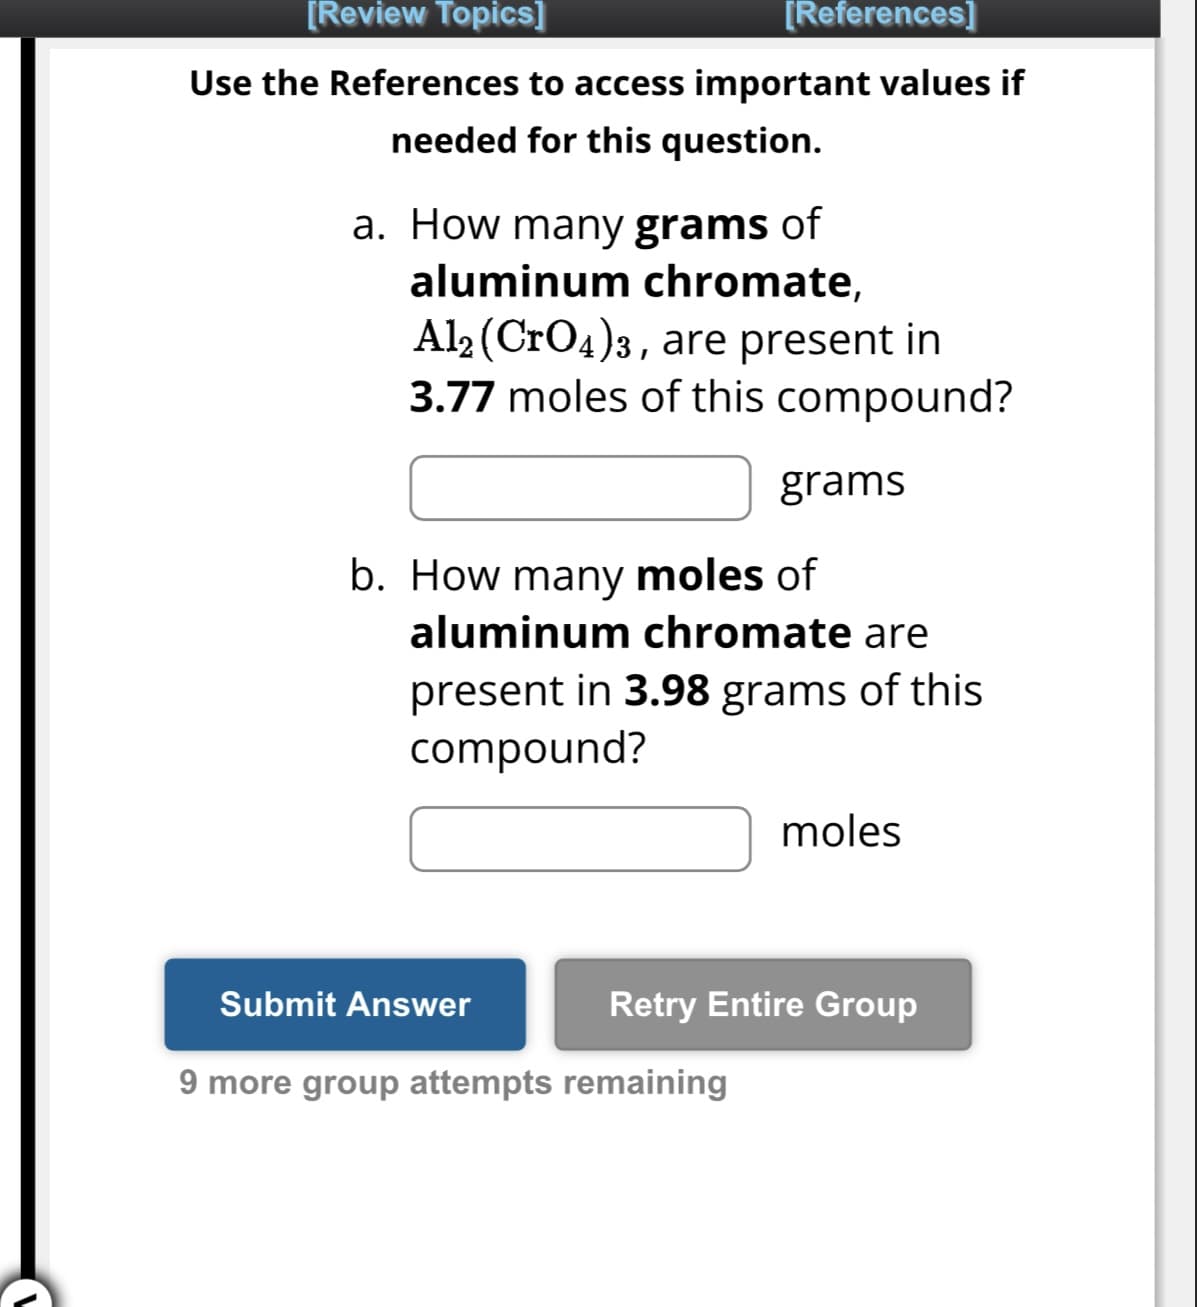 [Review Topics]
[References]
Use the References to access important values if
needed for this question.
a. How many grams of
aluminum chromate,
Al2 (CrO4)3, are present in
3.77 moles of this compound?
b. How many moles of
aluminum chromate are
present in 3.98 grams of this
compound?
Submit Answer
grams
9 more group attempts remaining
moles
Retry Entire Group